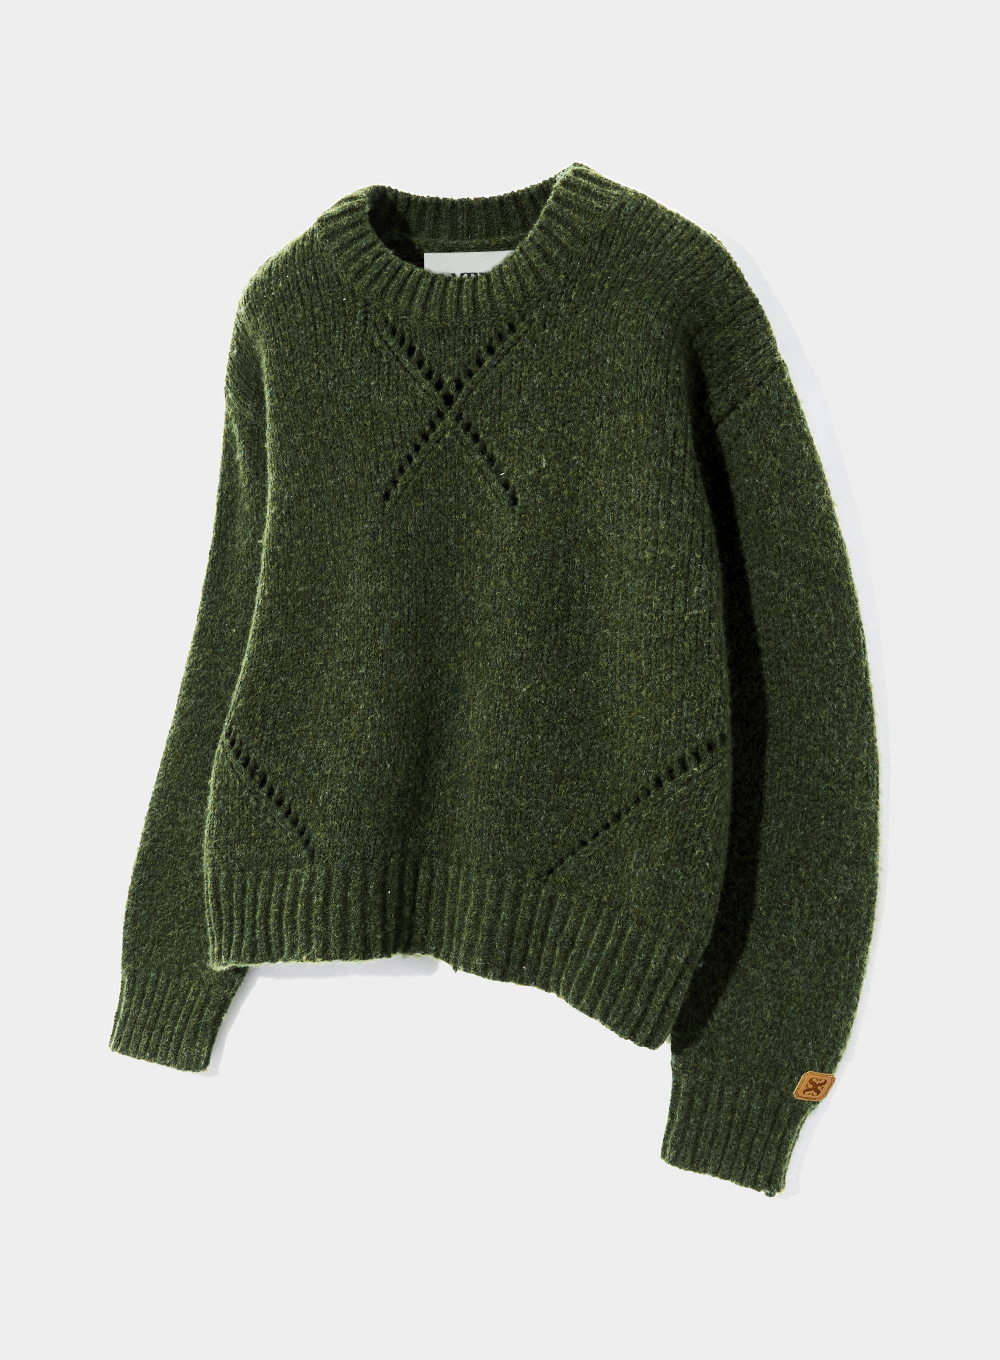 Cardiff Wool Blend Pullover Knit - Olive Khaki